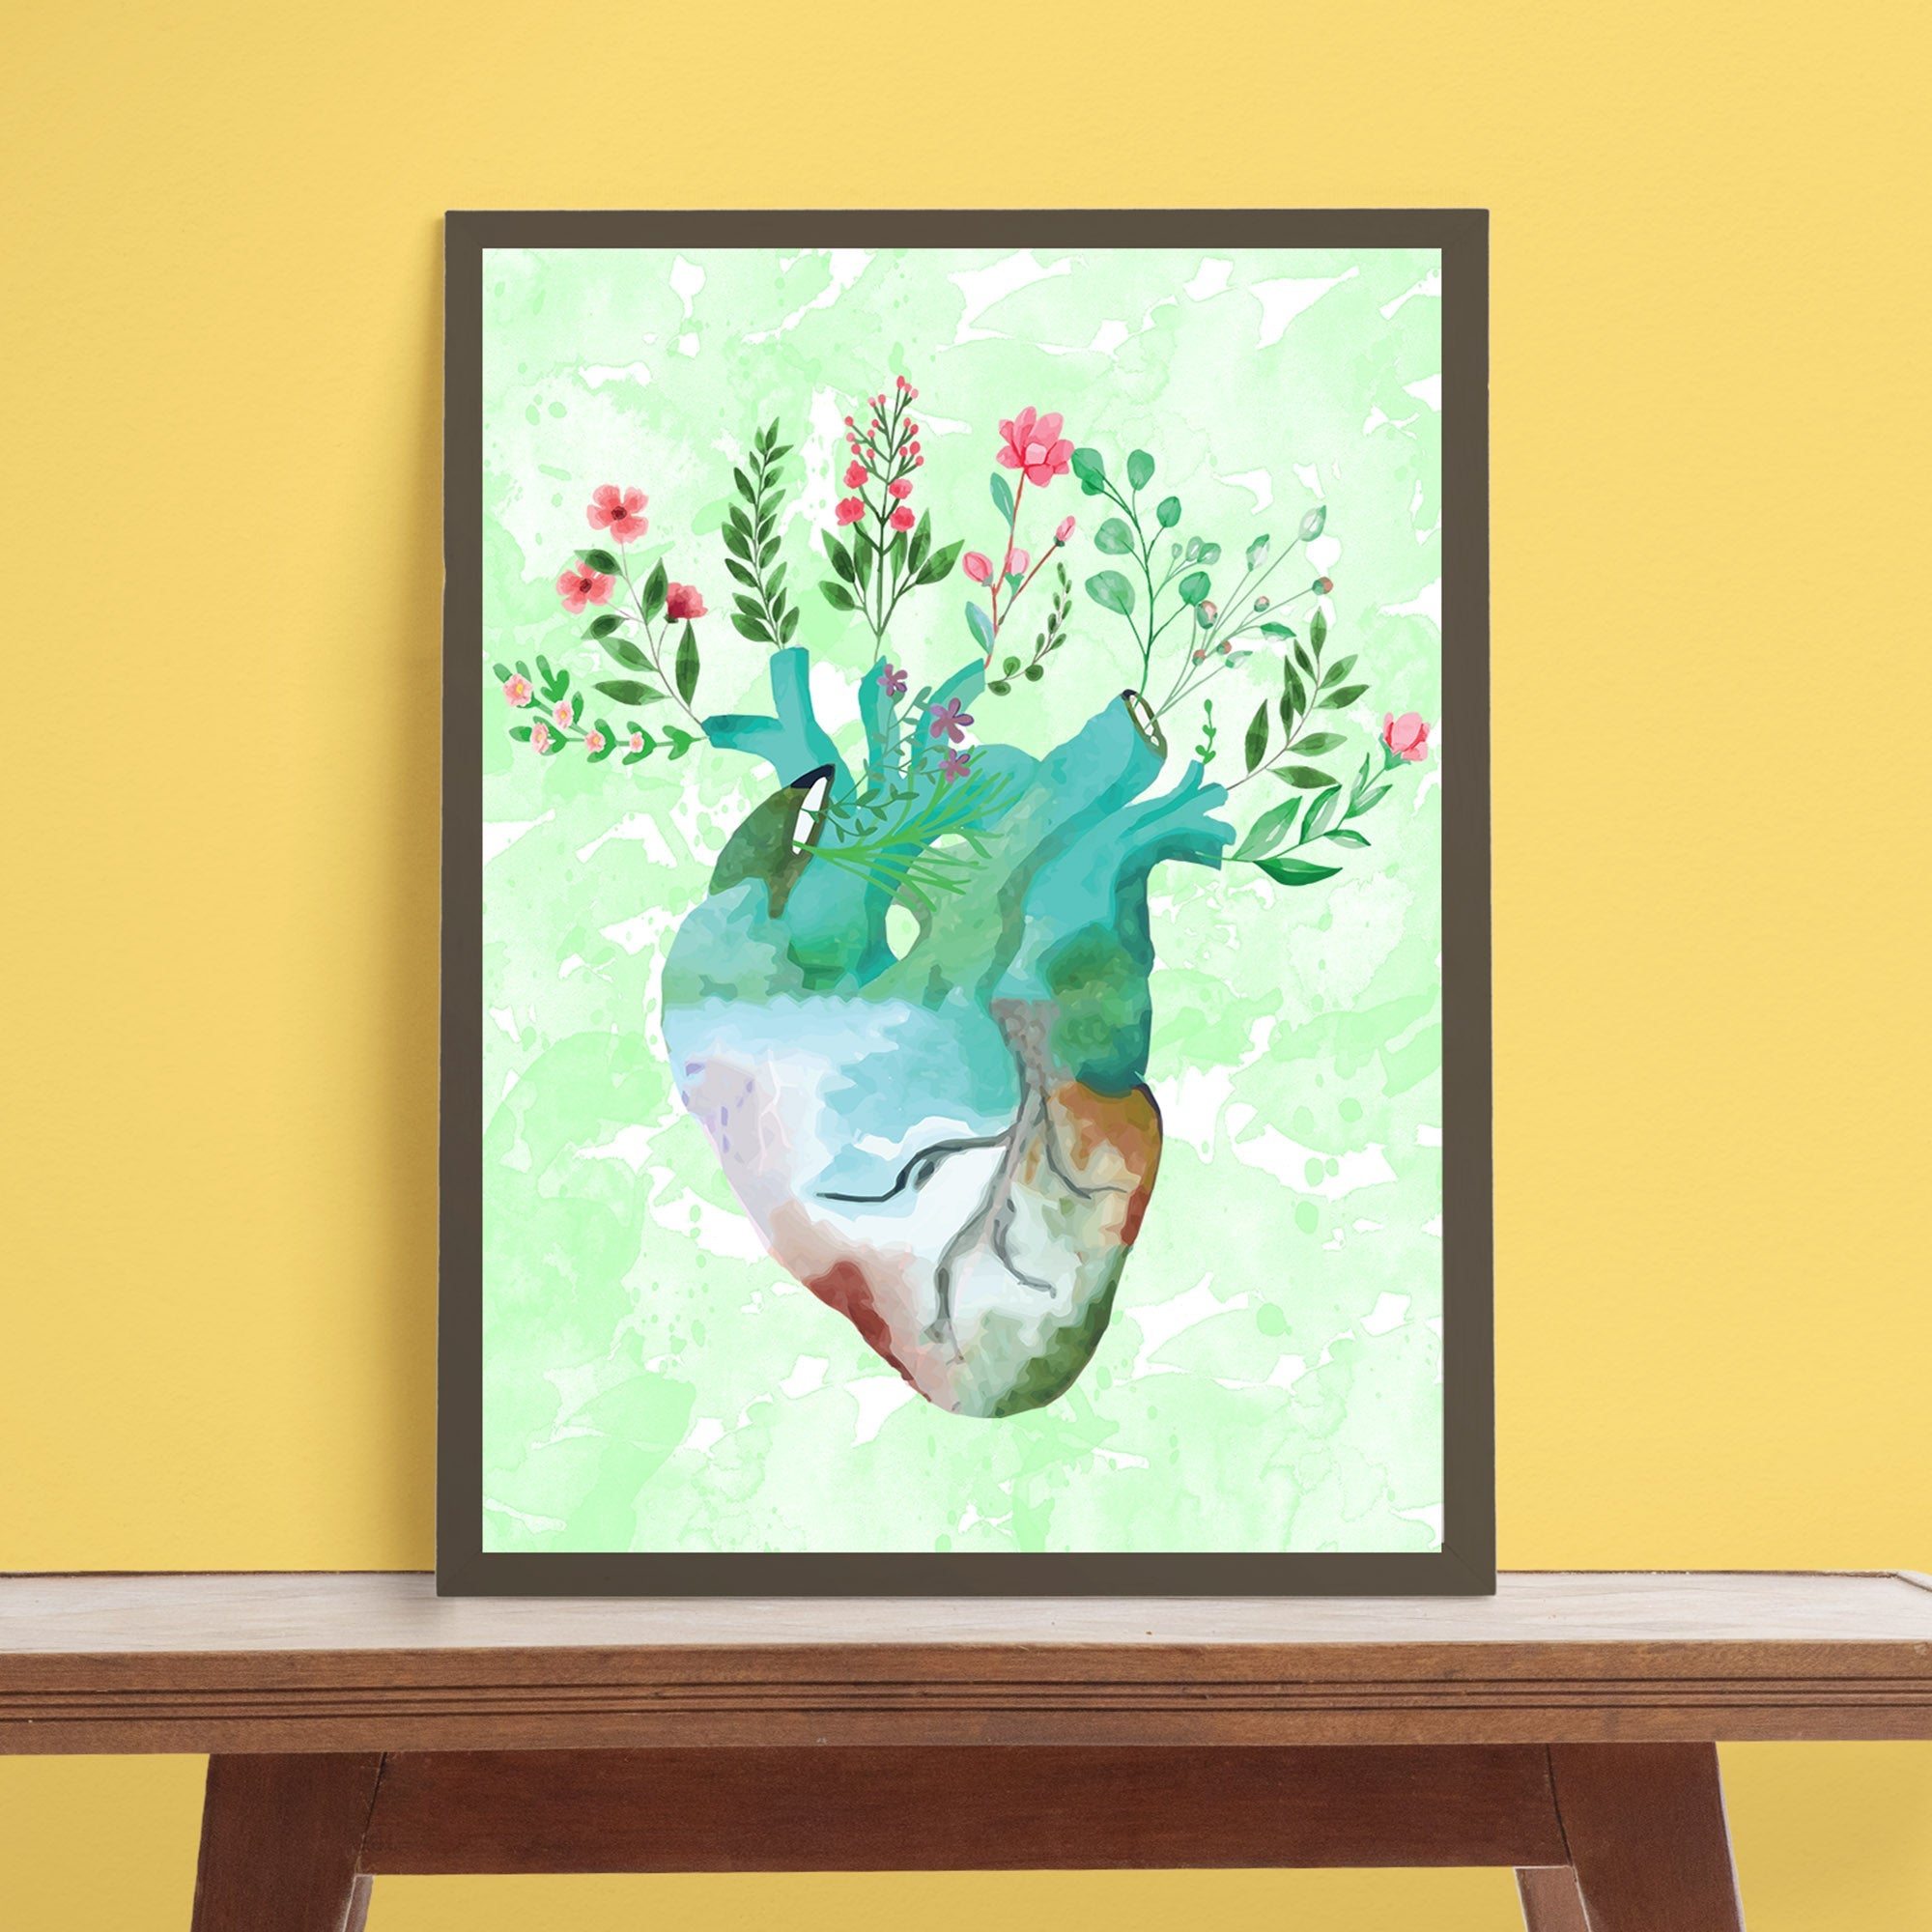 Floral Heart Art - Framed Poster For Clinics, Hospitals &amp; Study Rooms